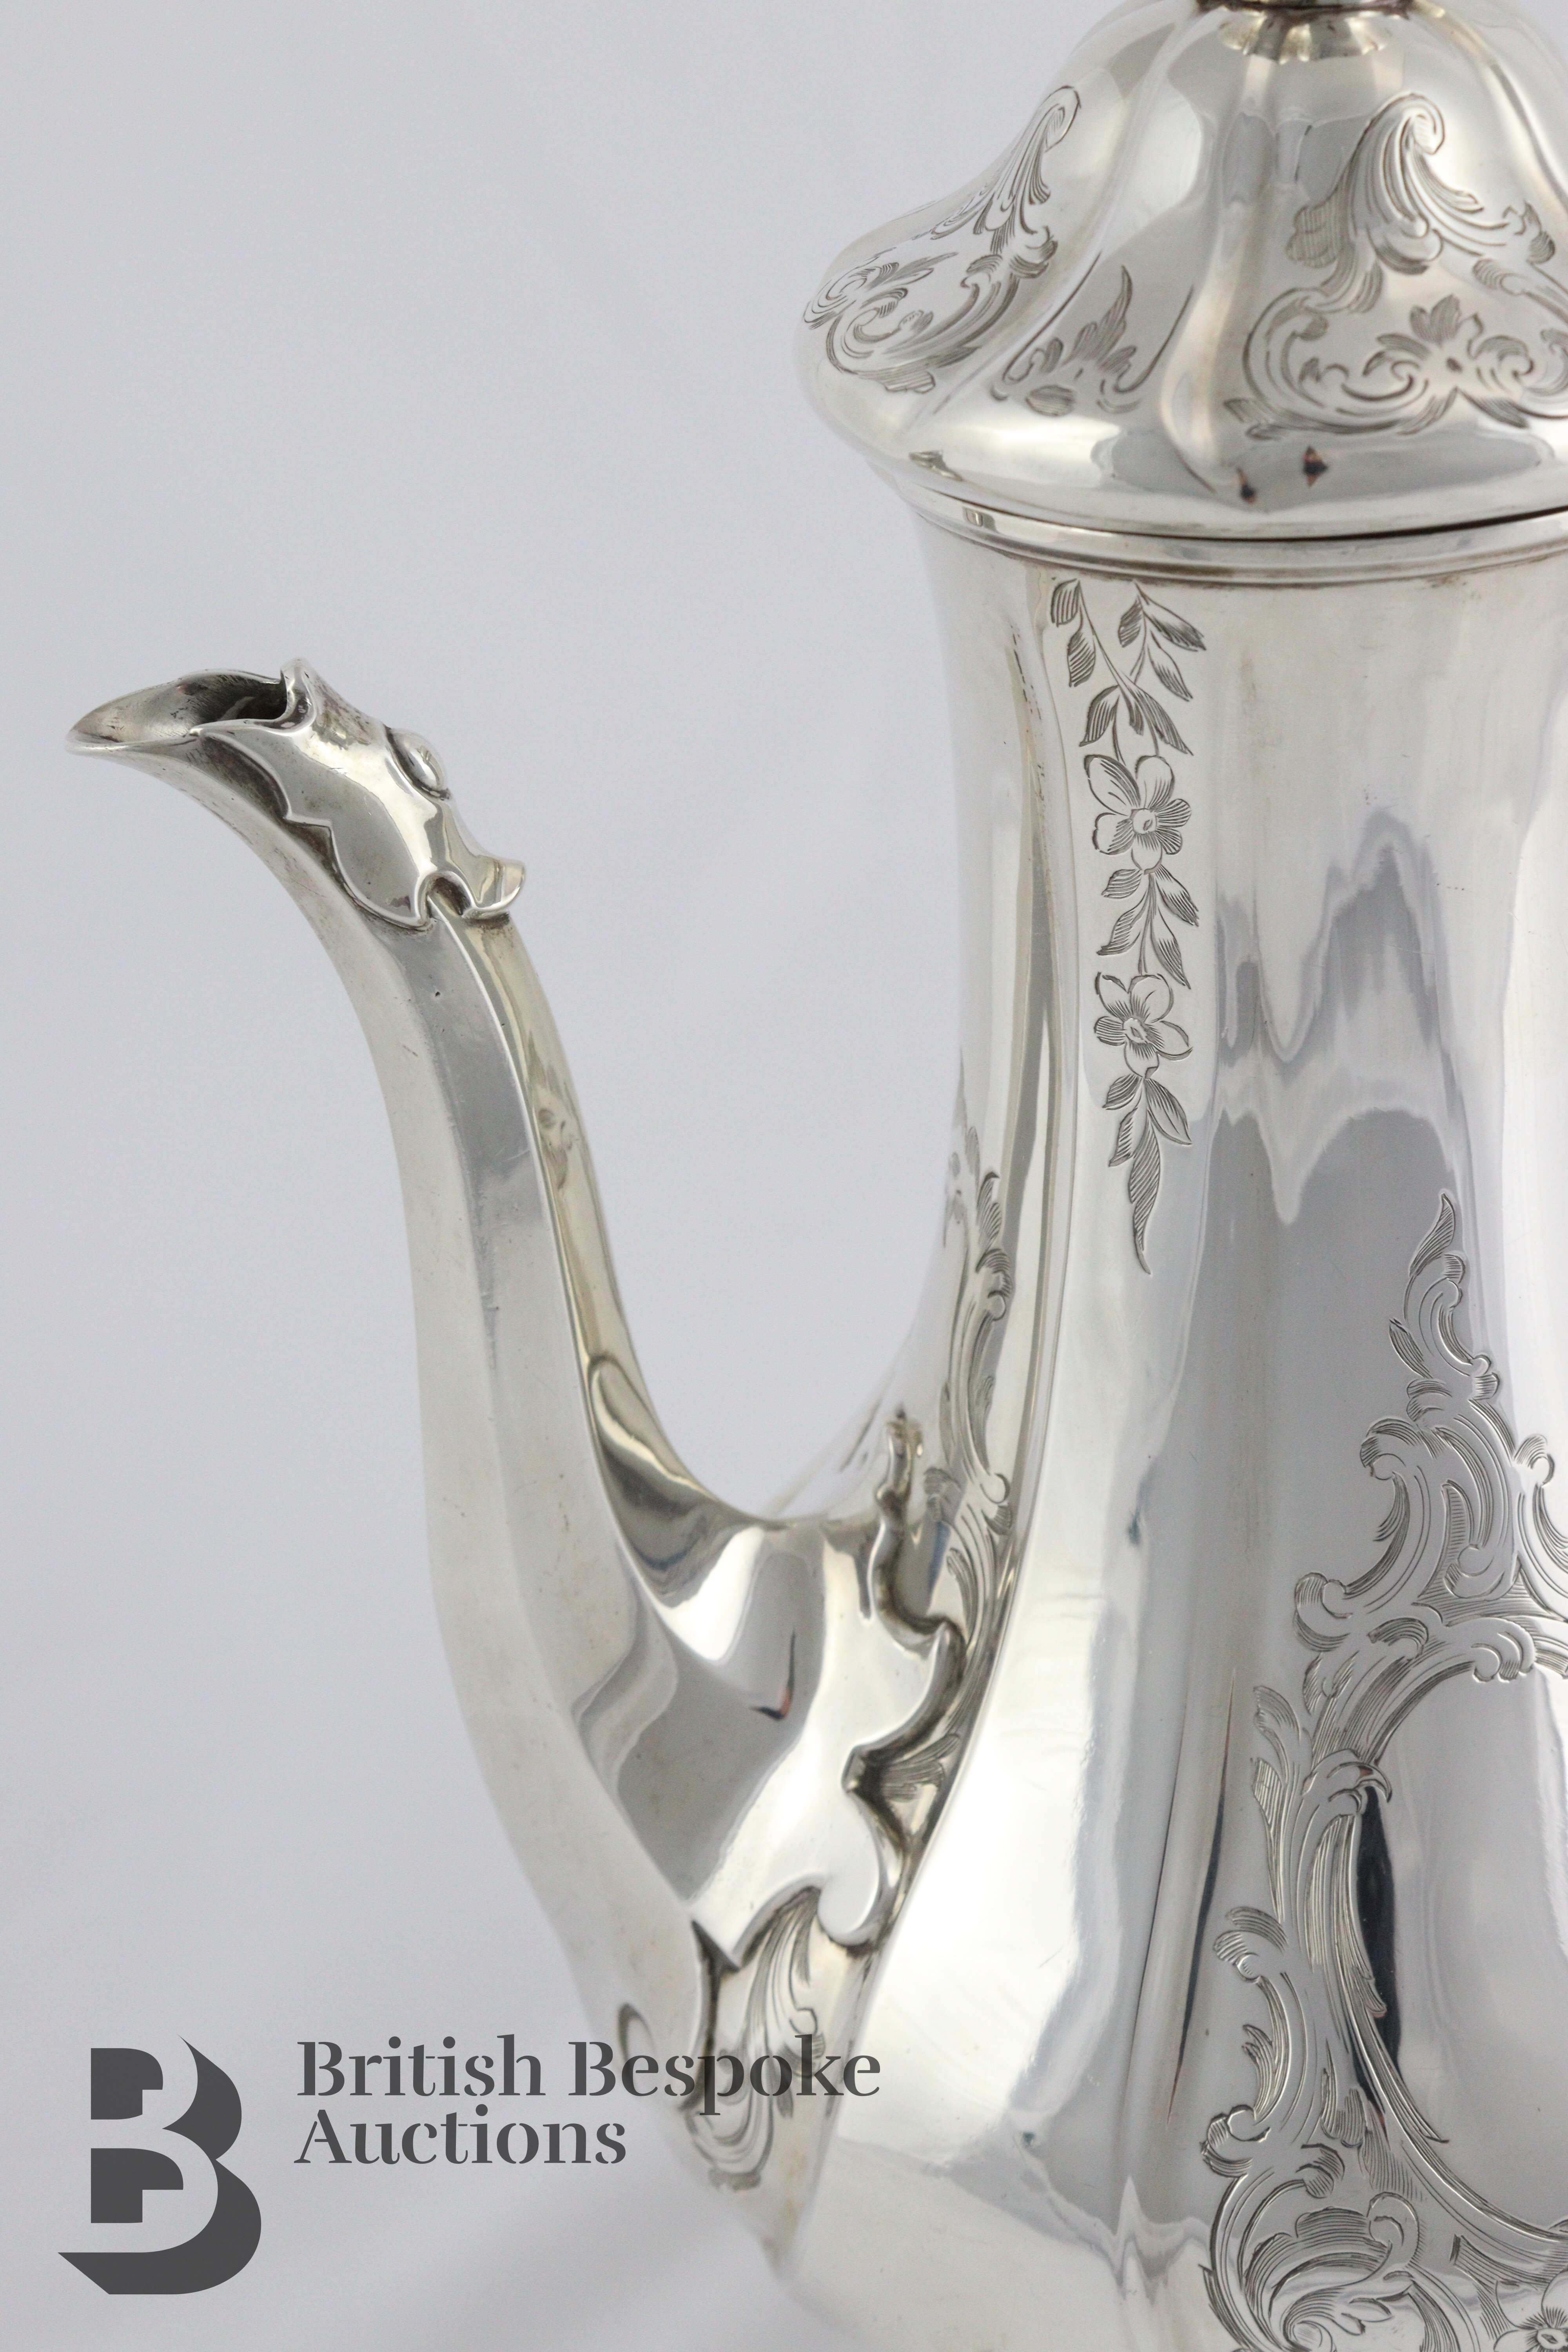 Victorian Silver Coffee Pot - Image 4 of 8